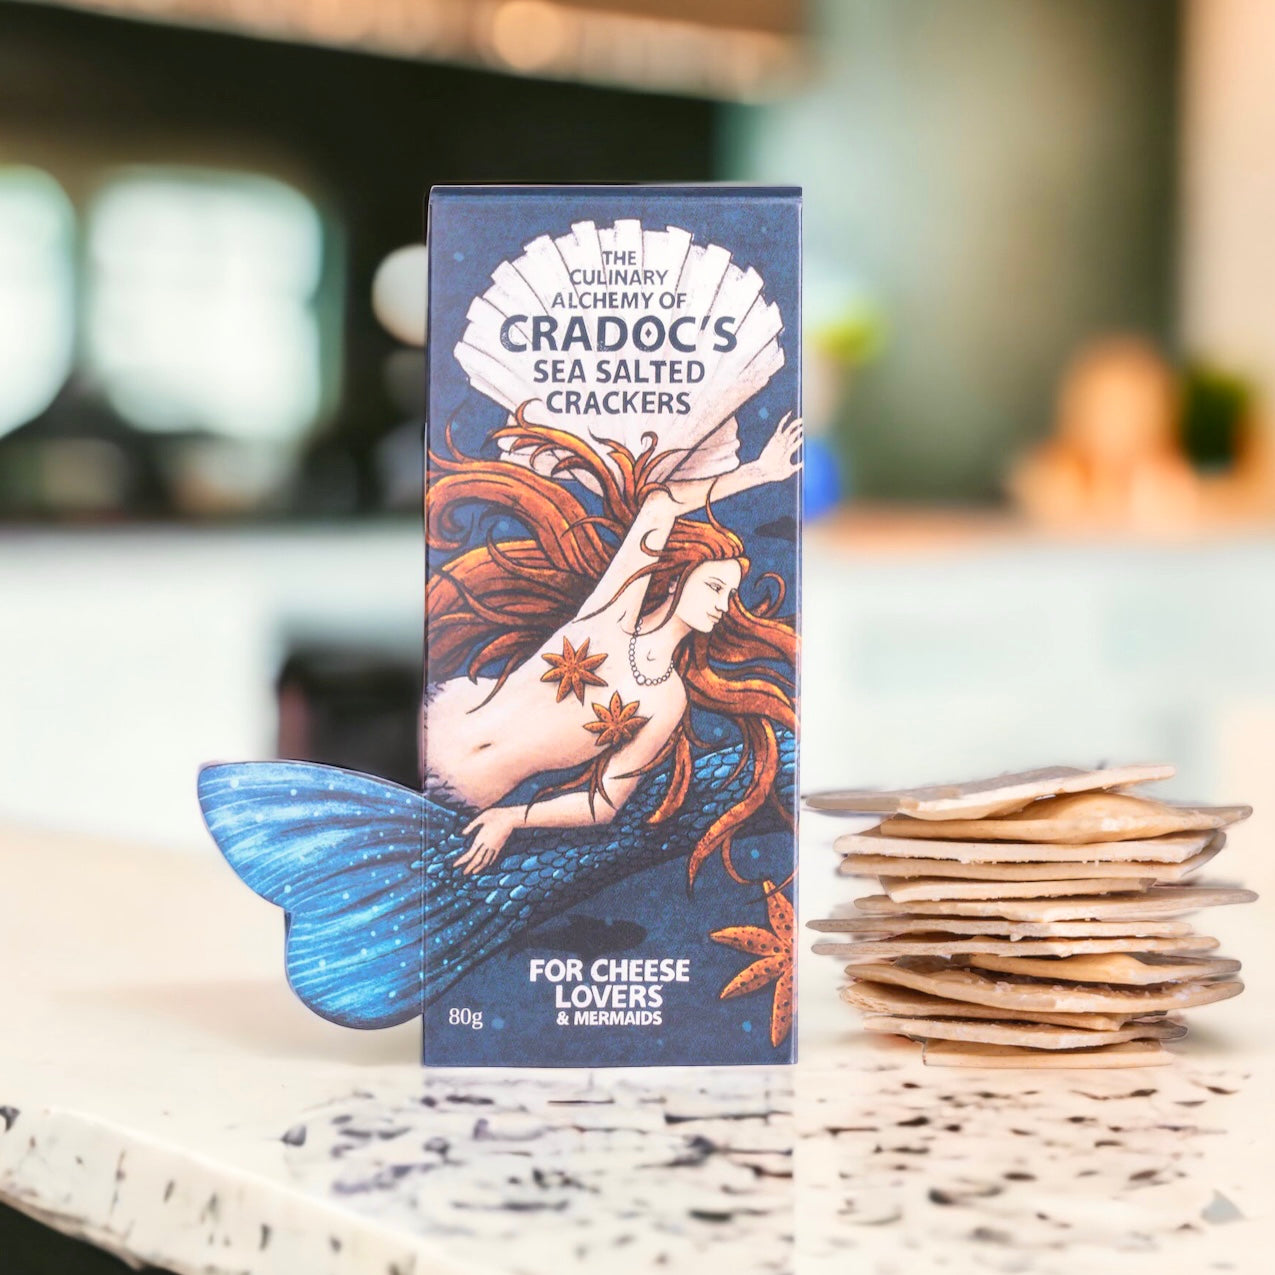 Cradoc's Sea Salted Crackers for Cheese Lovers